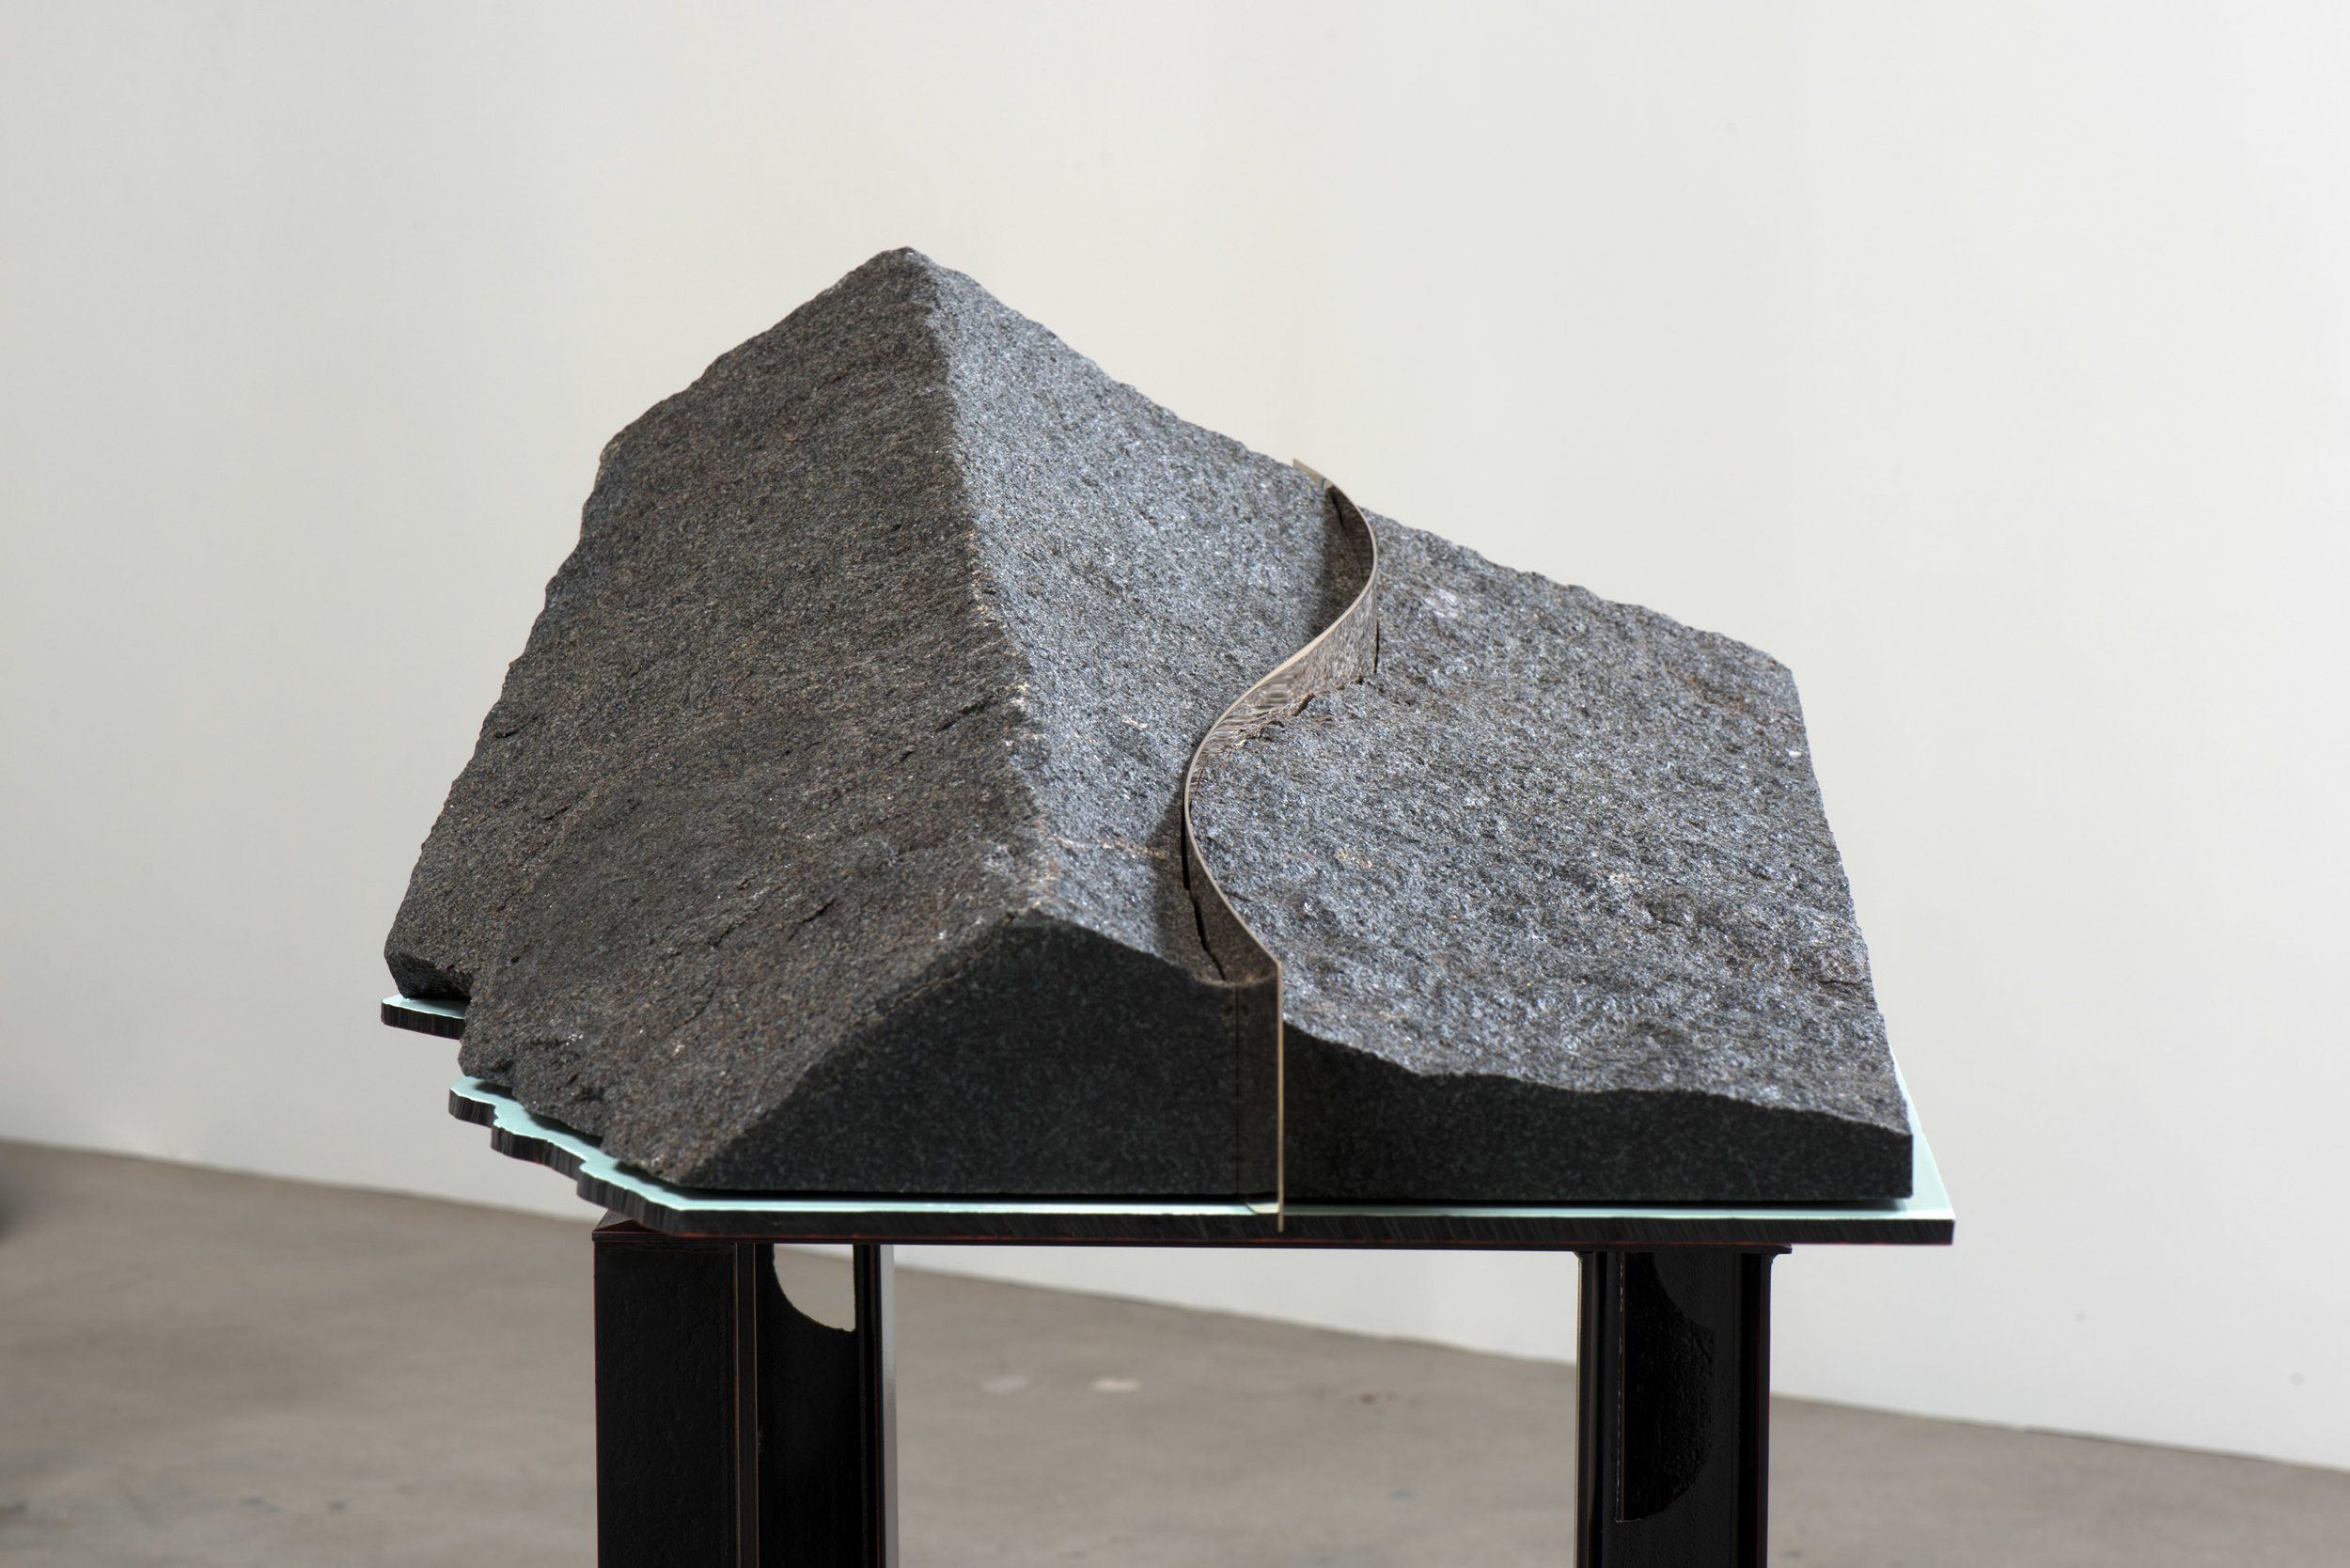   VI Model of an Earth Fastener on the Garlock Fault , 2019 Steel, enamel, granidiorite, and bronze 50 x 48 x 25 inches 